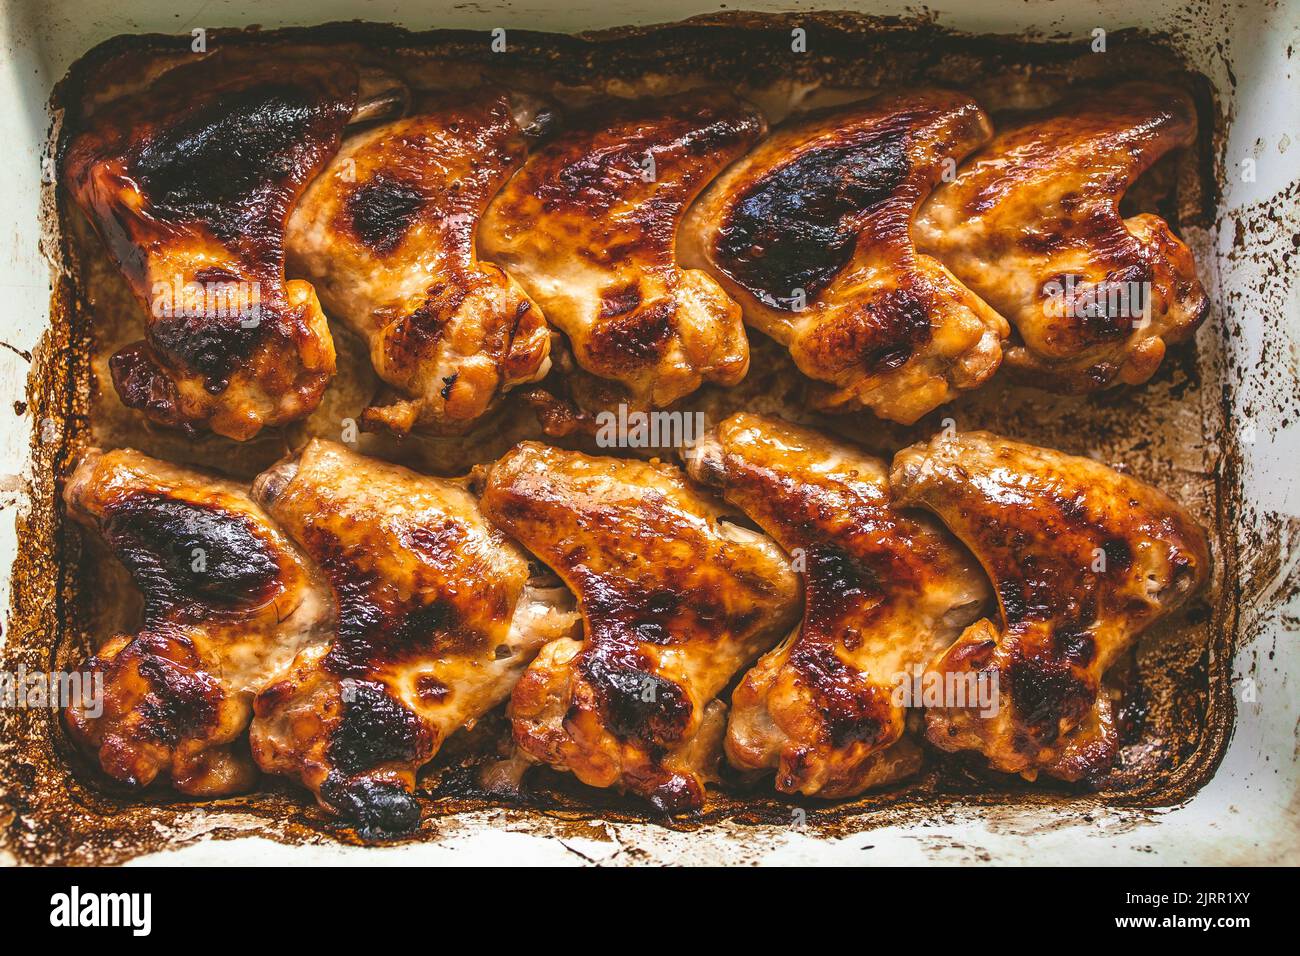 appetizing baked chicken wings in a baking sheet, top view. Stock Photo